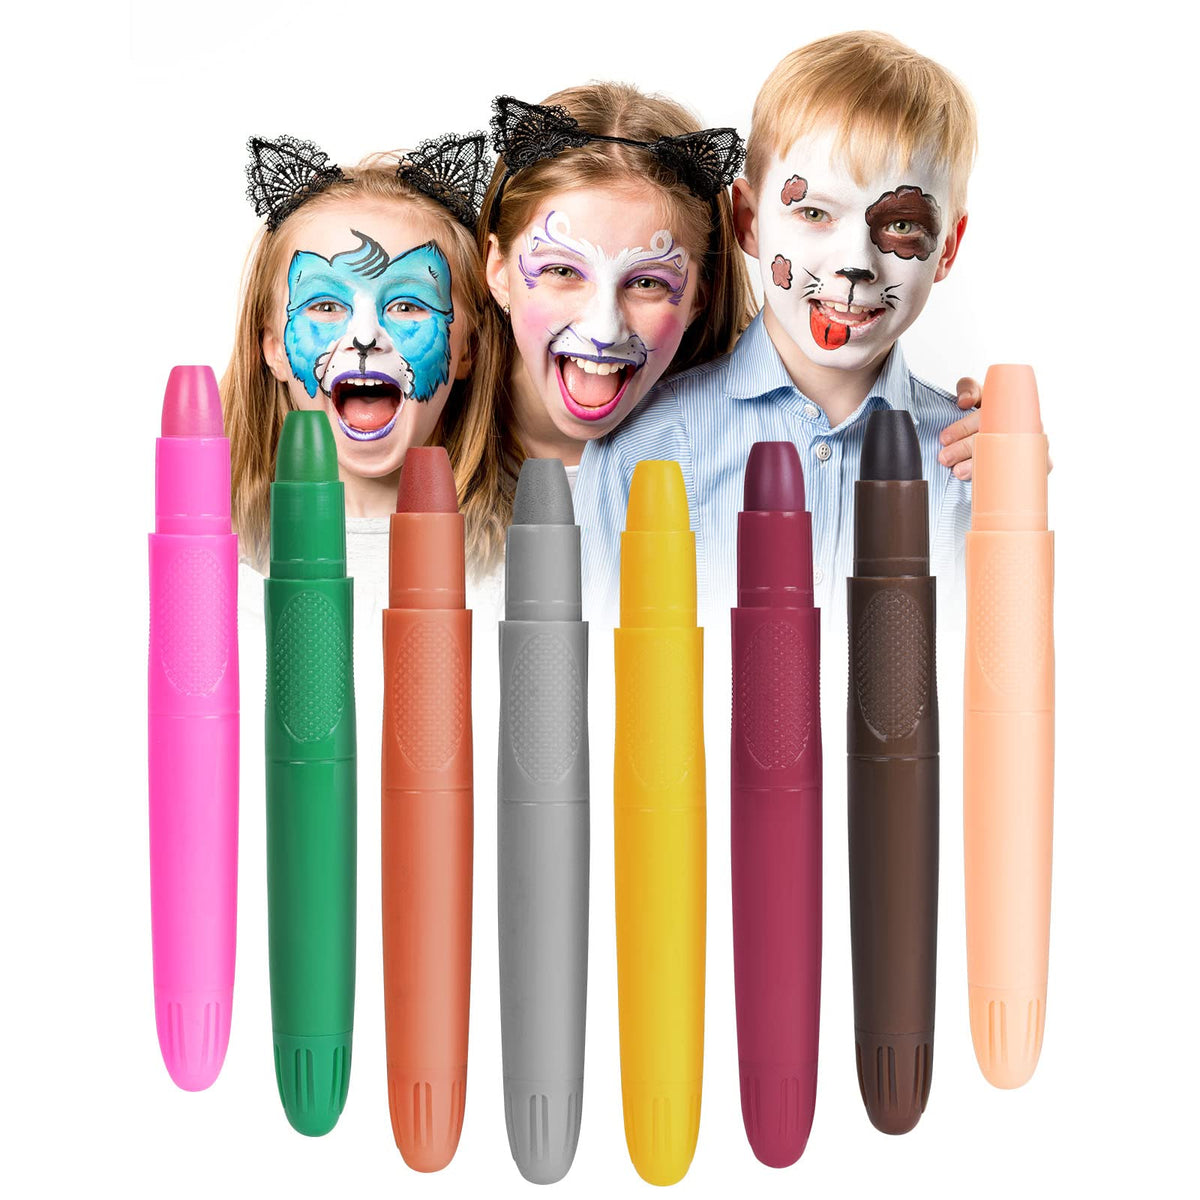 URAQT Face Paint Marker, 8 Colors Body Crayons Kit Non-Toxic Face Body Makeup Paint, Professional Face Paint Crayons for Kids Children, Face Paint Stick Set for Easter Cosplay Party Carnival